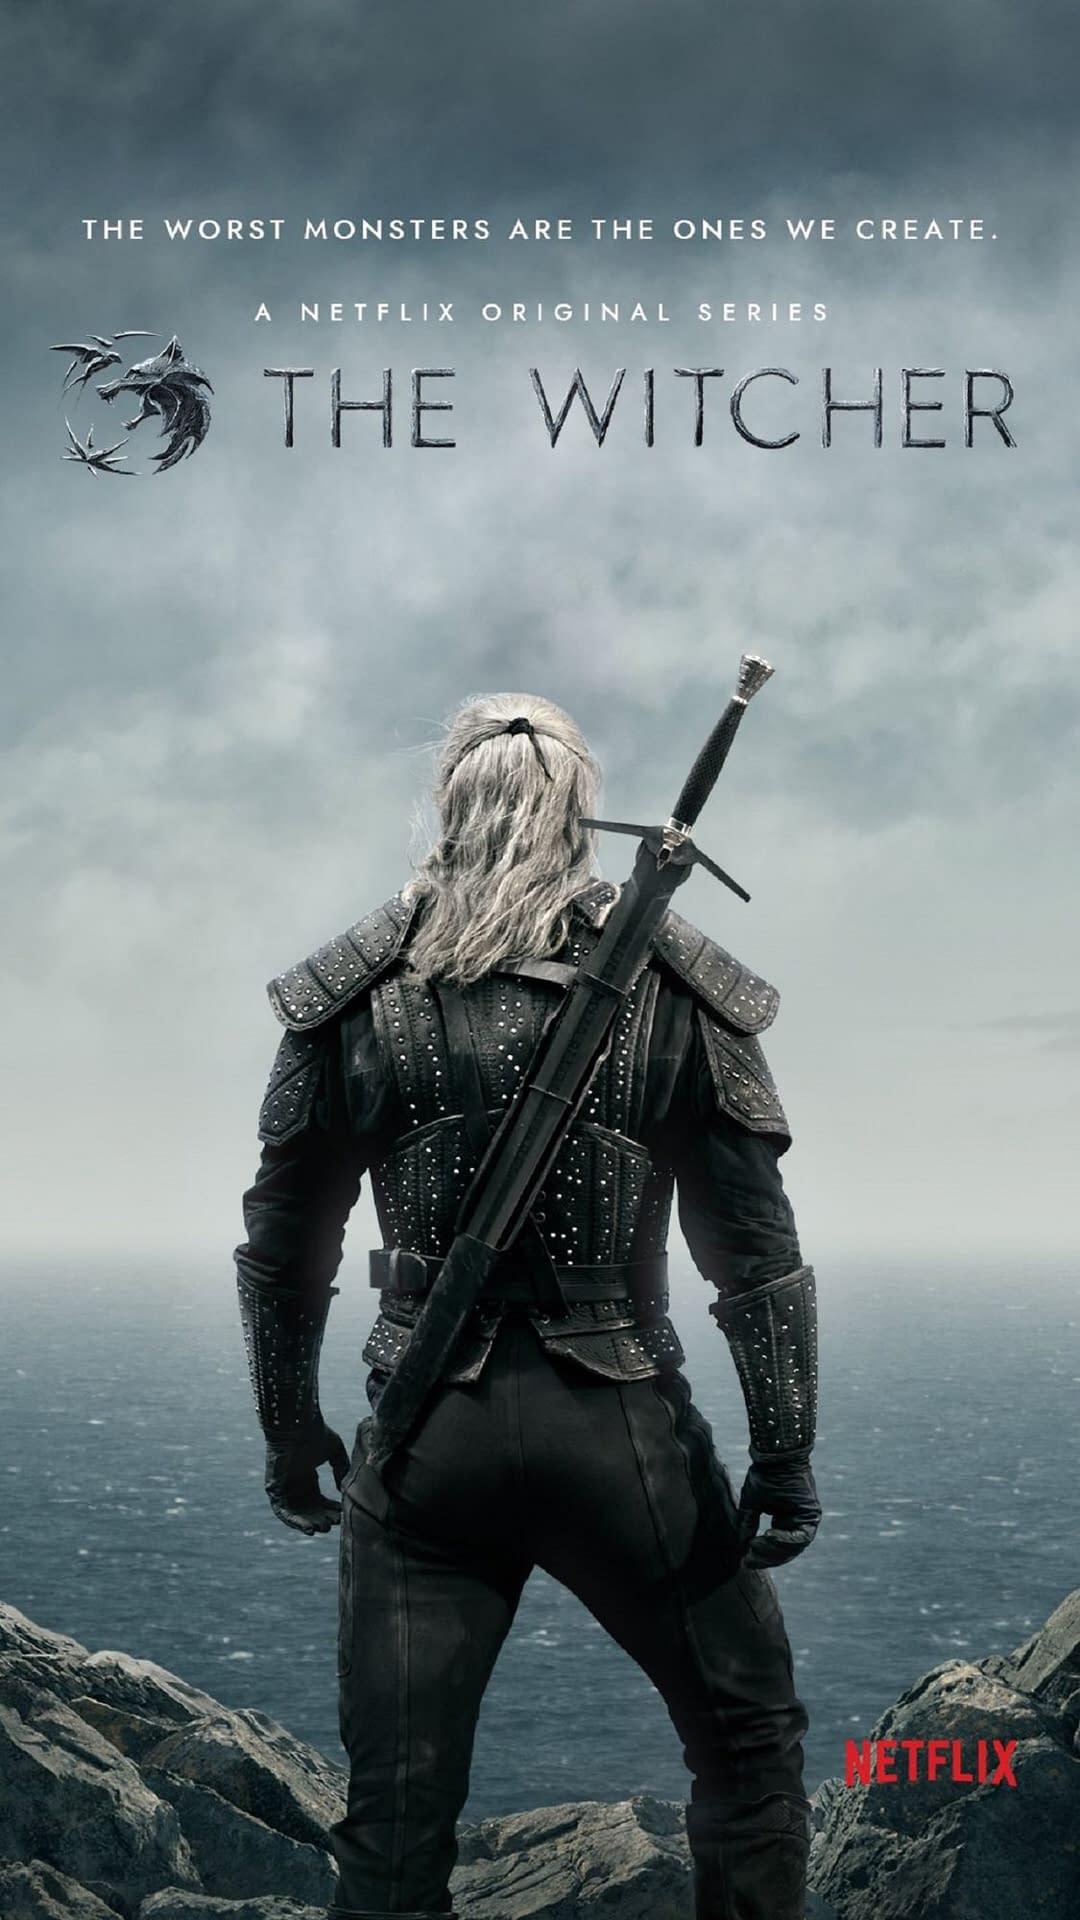 "The Witcher" Offers New Looks at Anya Chalotra's Sorceress Yennefer [PREVIEW]